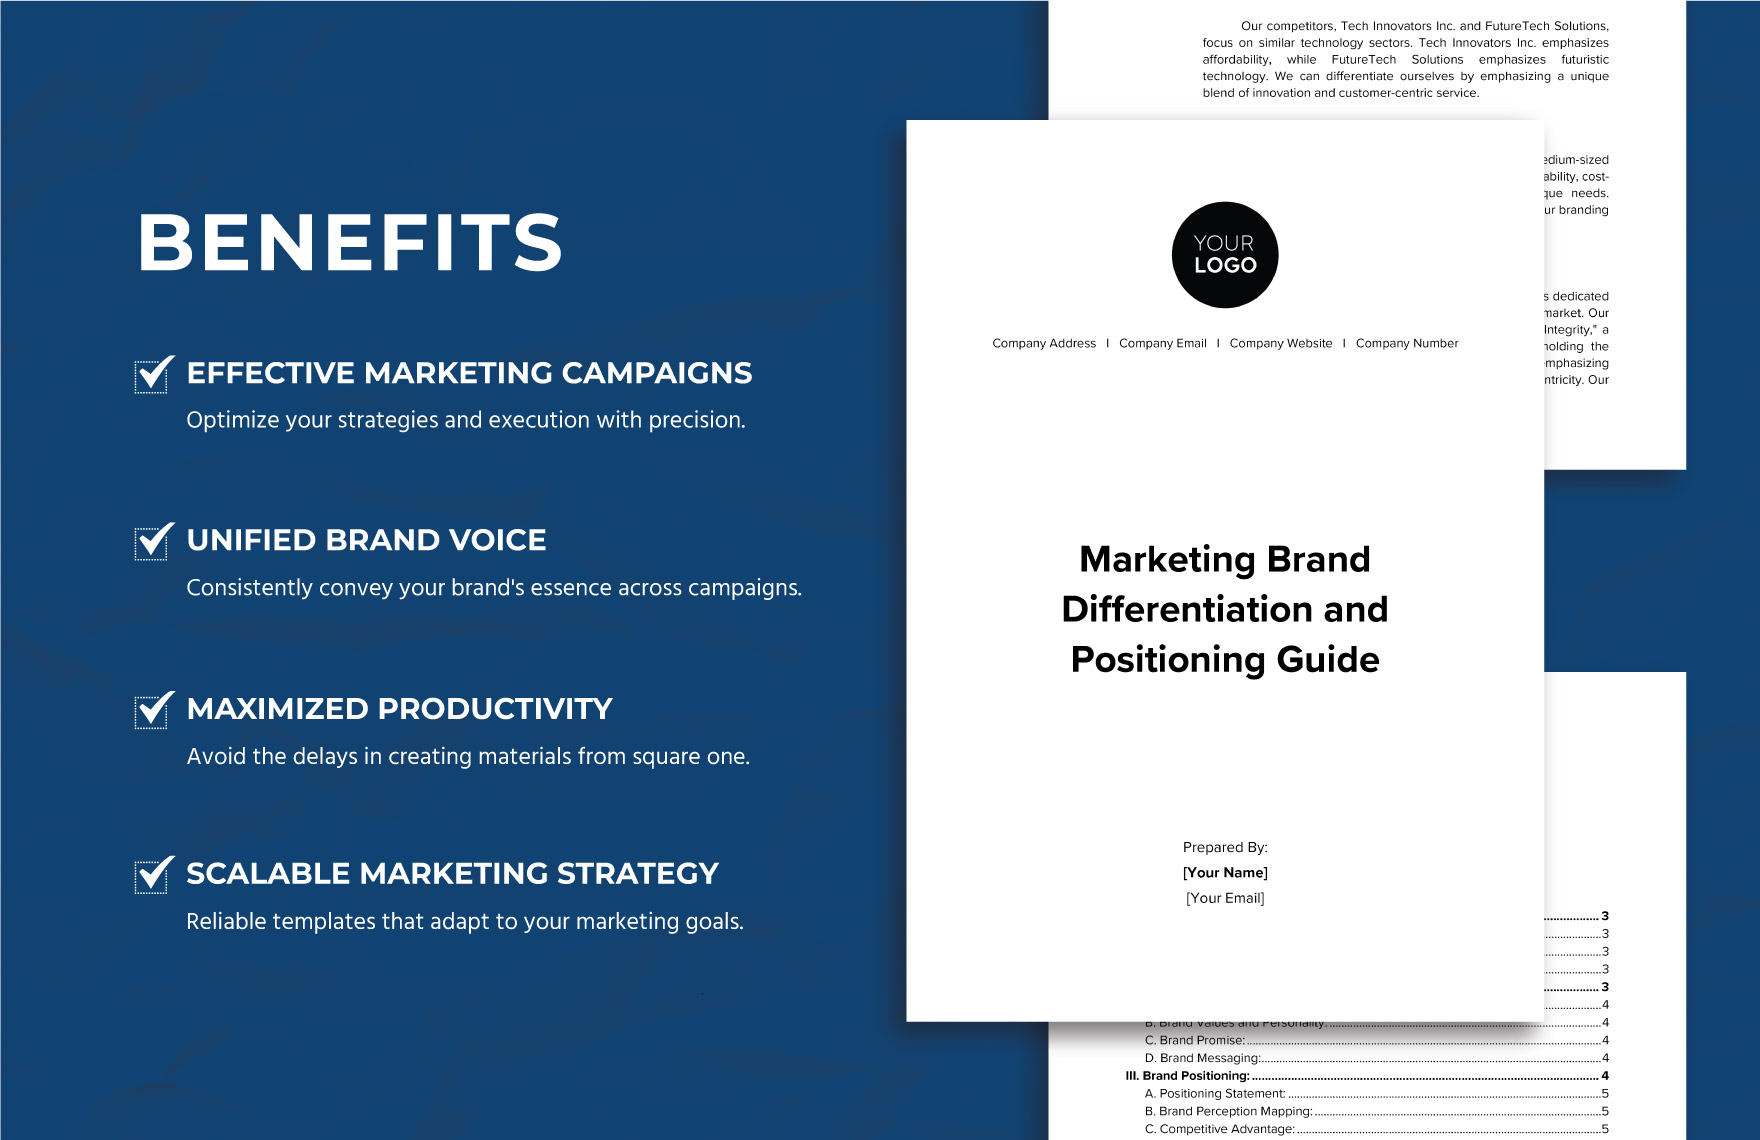 Marketing Brand Differentiation and Positioning Guide Template